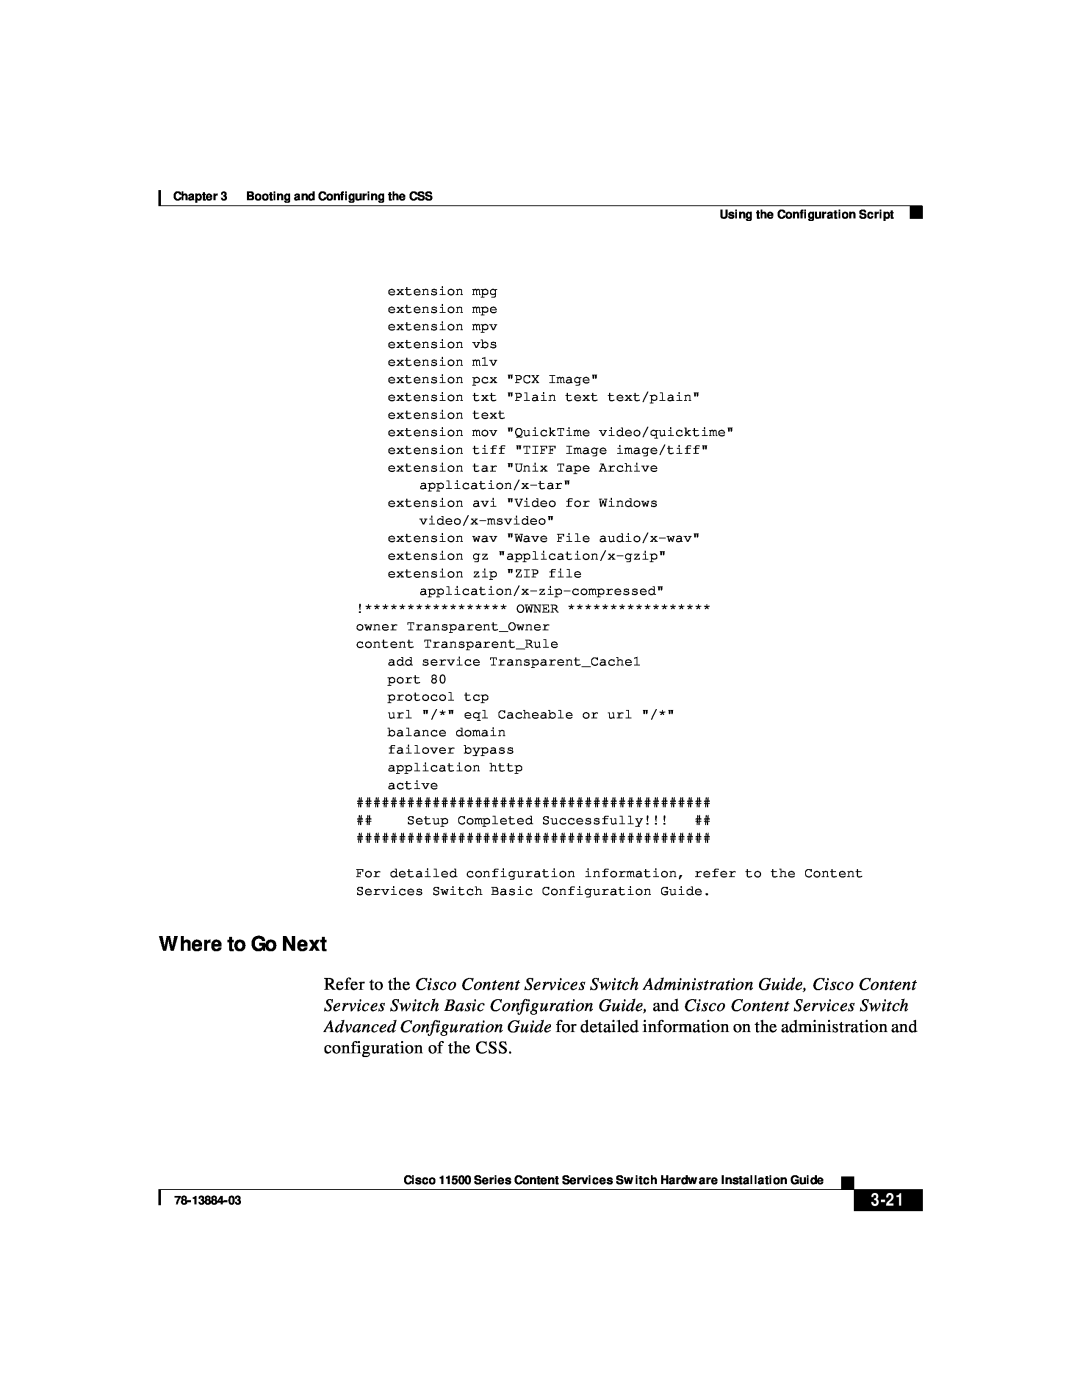 Cisco Systems 11500 Series manual Where to Go Next, 3-21, Booting and Configuring the CSS, Using the Configuration Script 